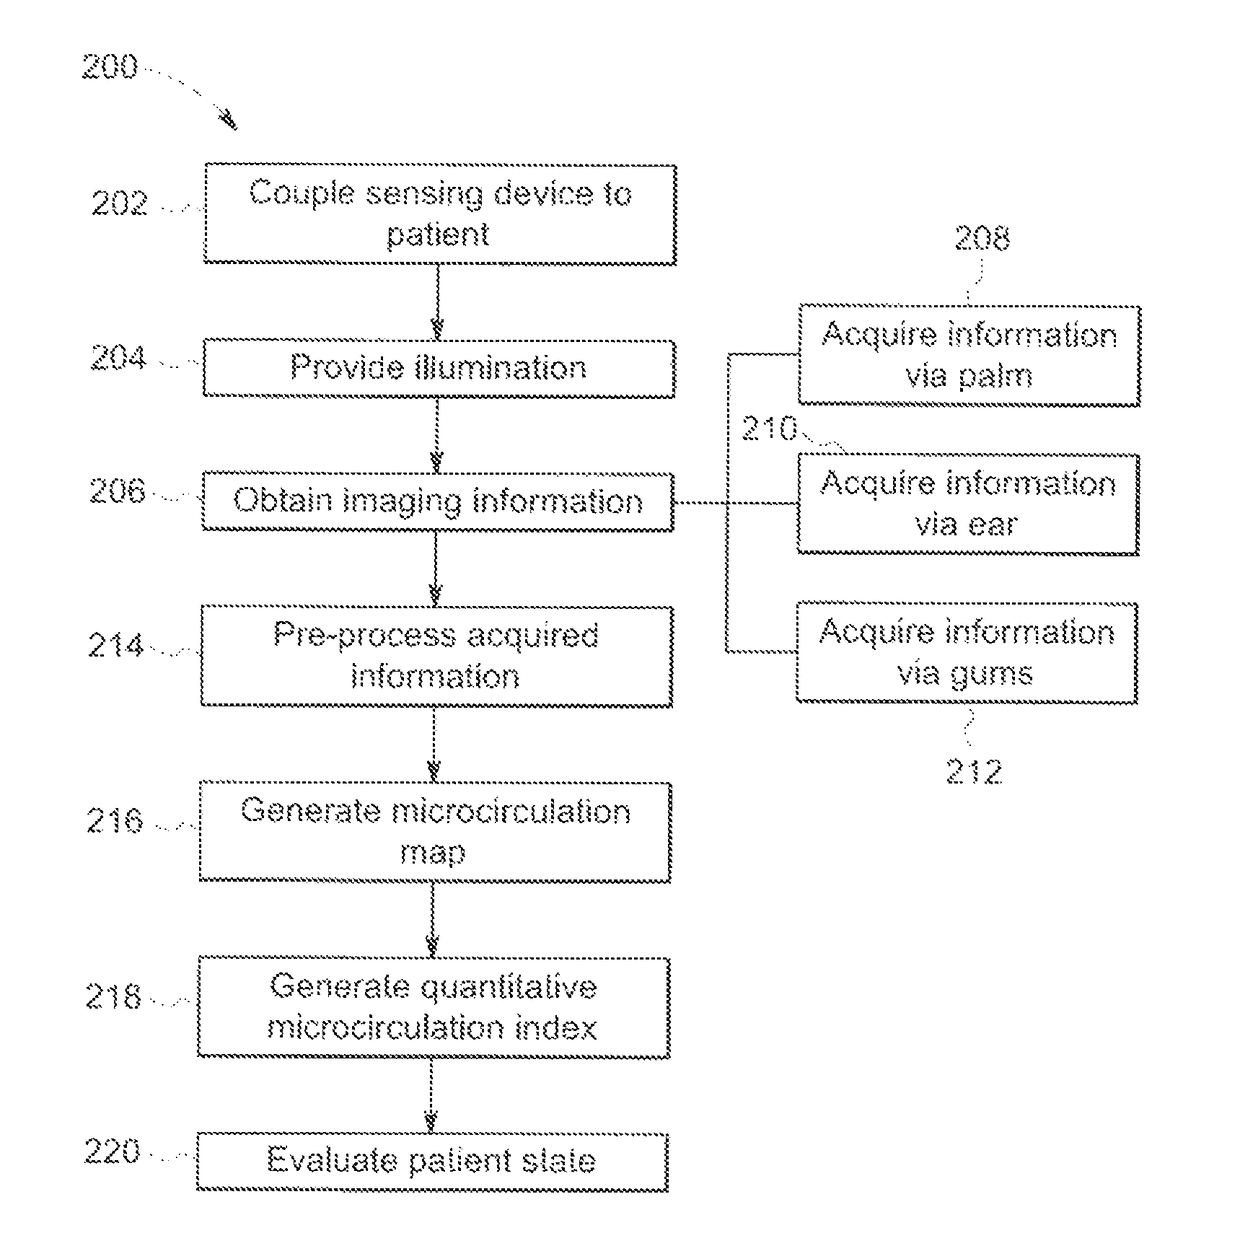 Systems and methods for quantitative microcirculation state monitoring